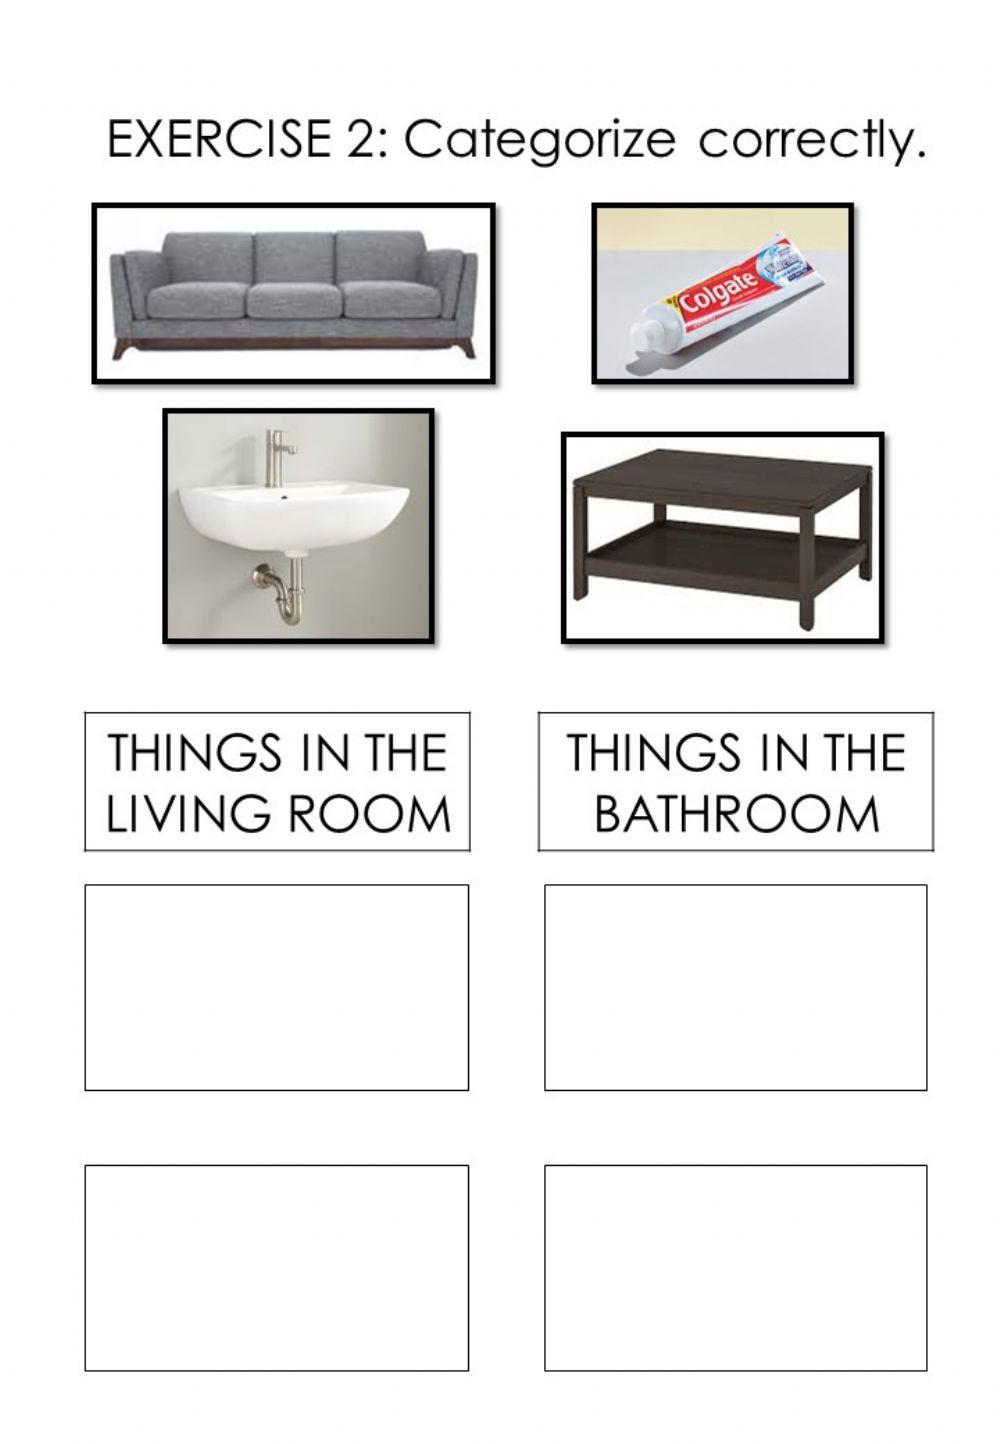 Things Around Us(Living room & Bathroom) : exercise 2